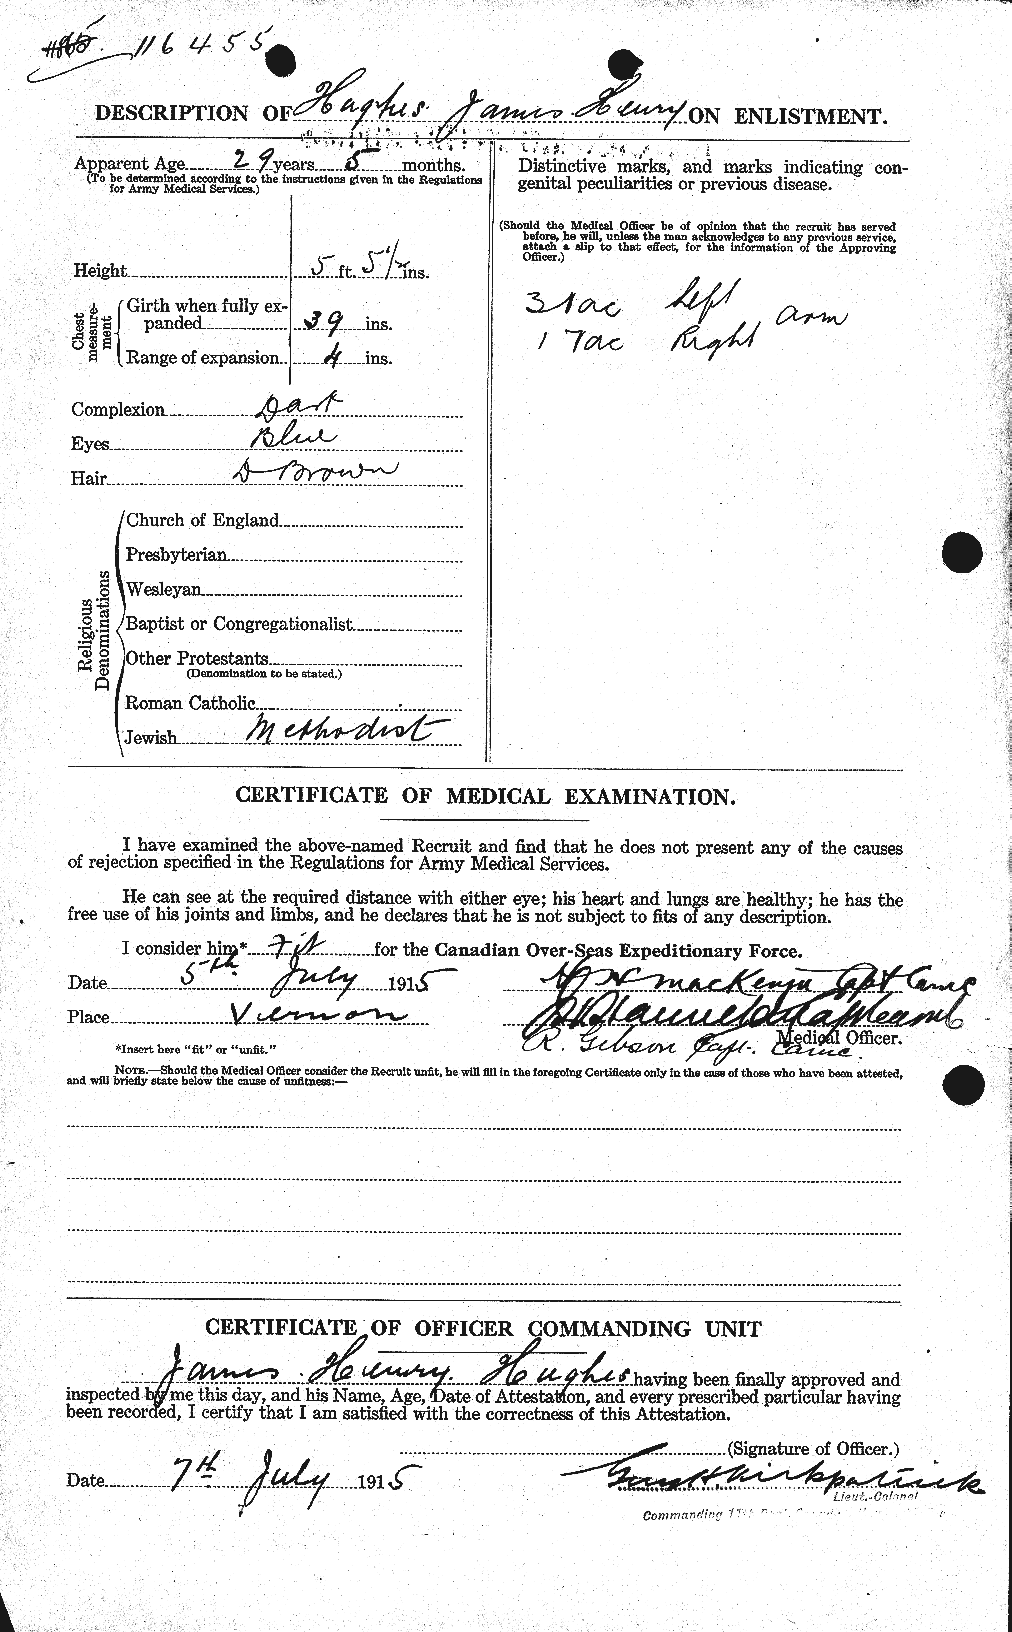 Personnel Records of the First World War - CEF 403963b